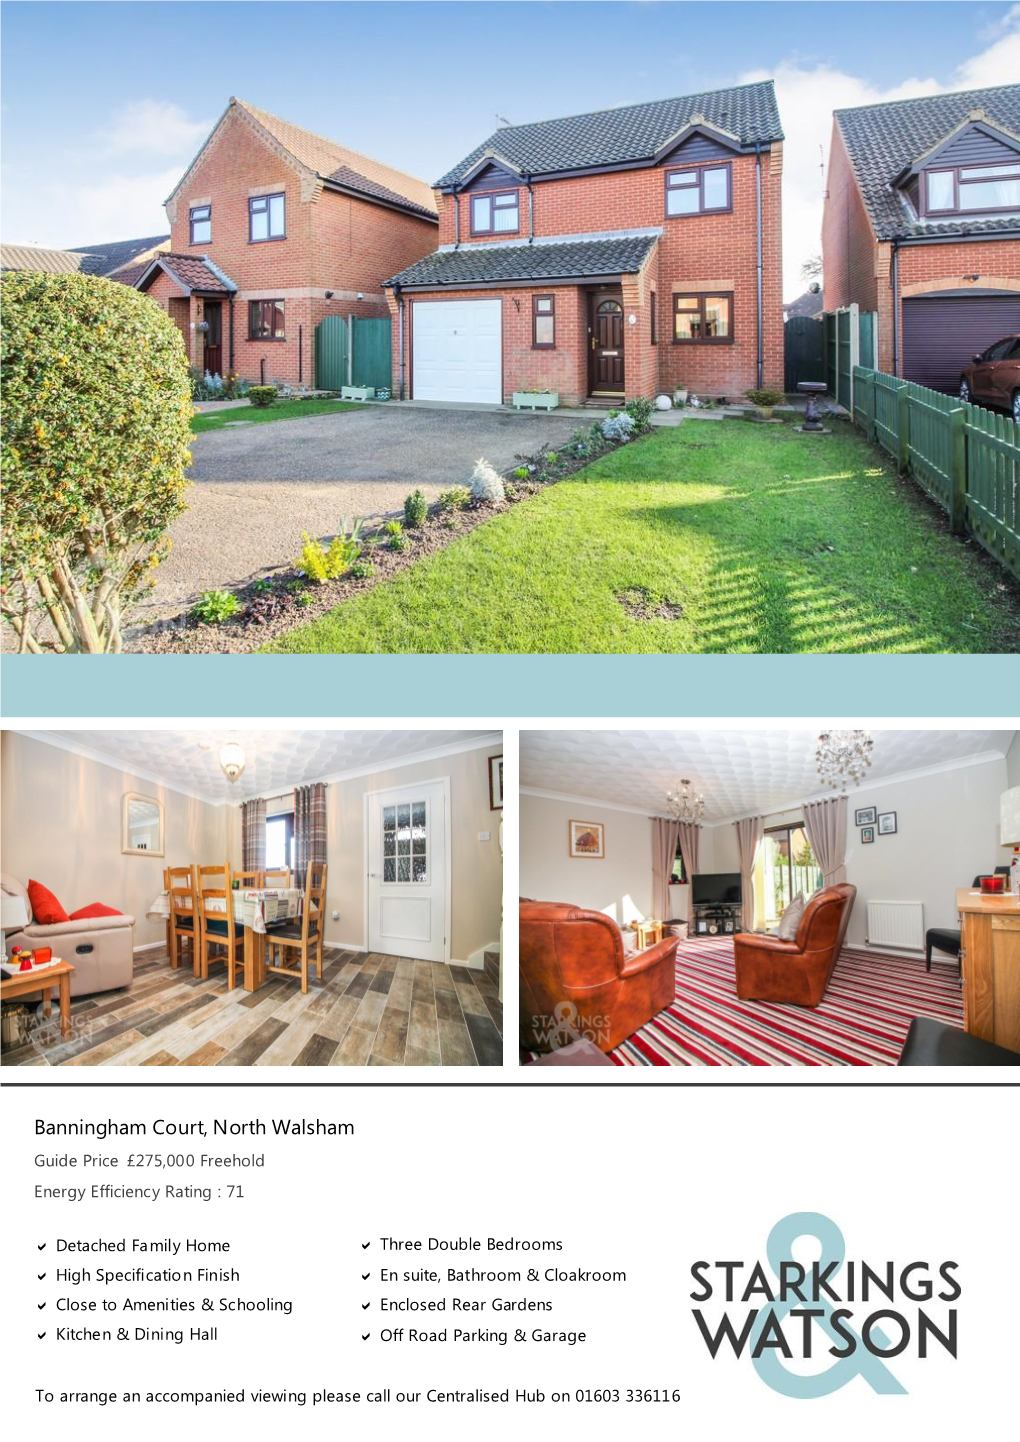 Banningham Court, North Walsham Guide Price £275,000 Freehold Energy Efficiency Rating : 71